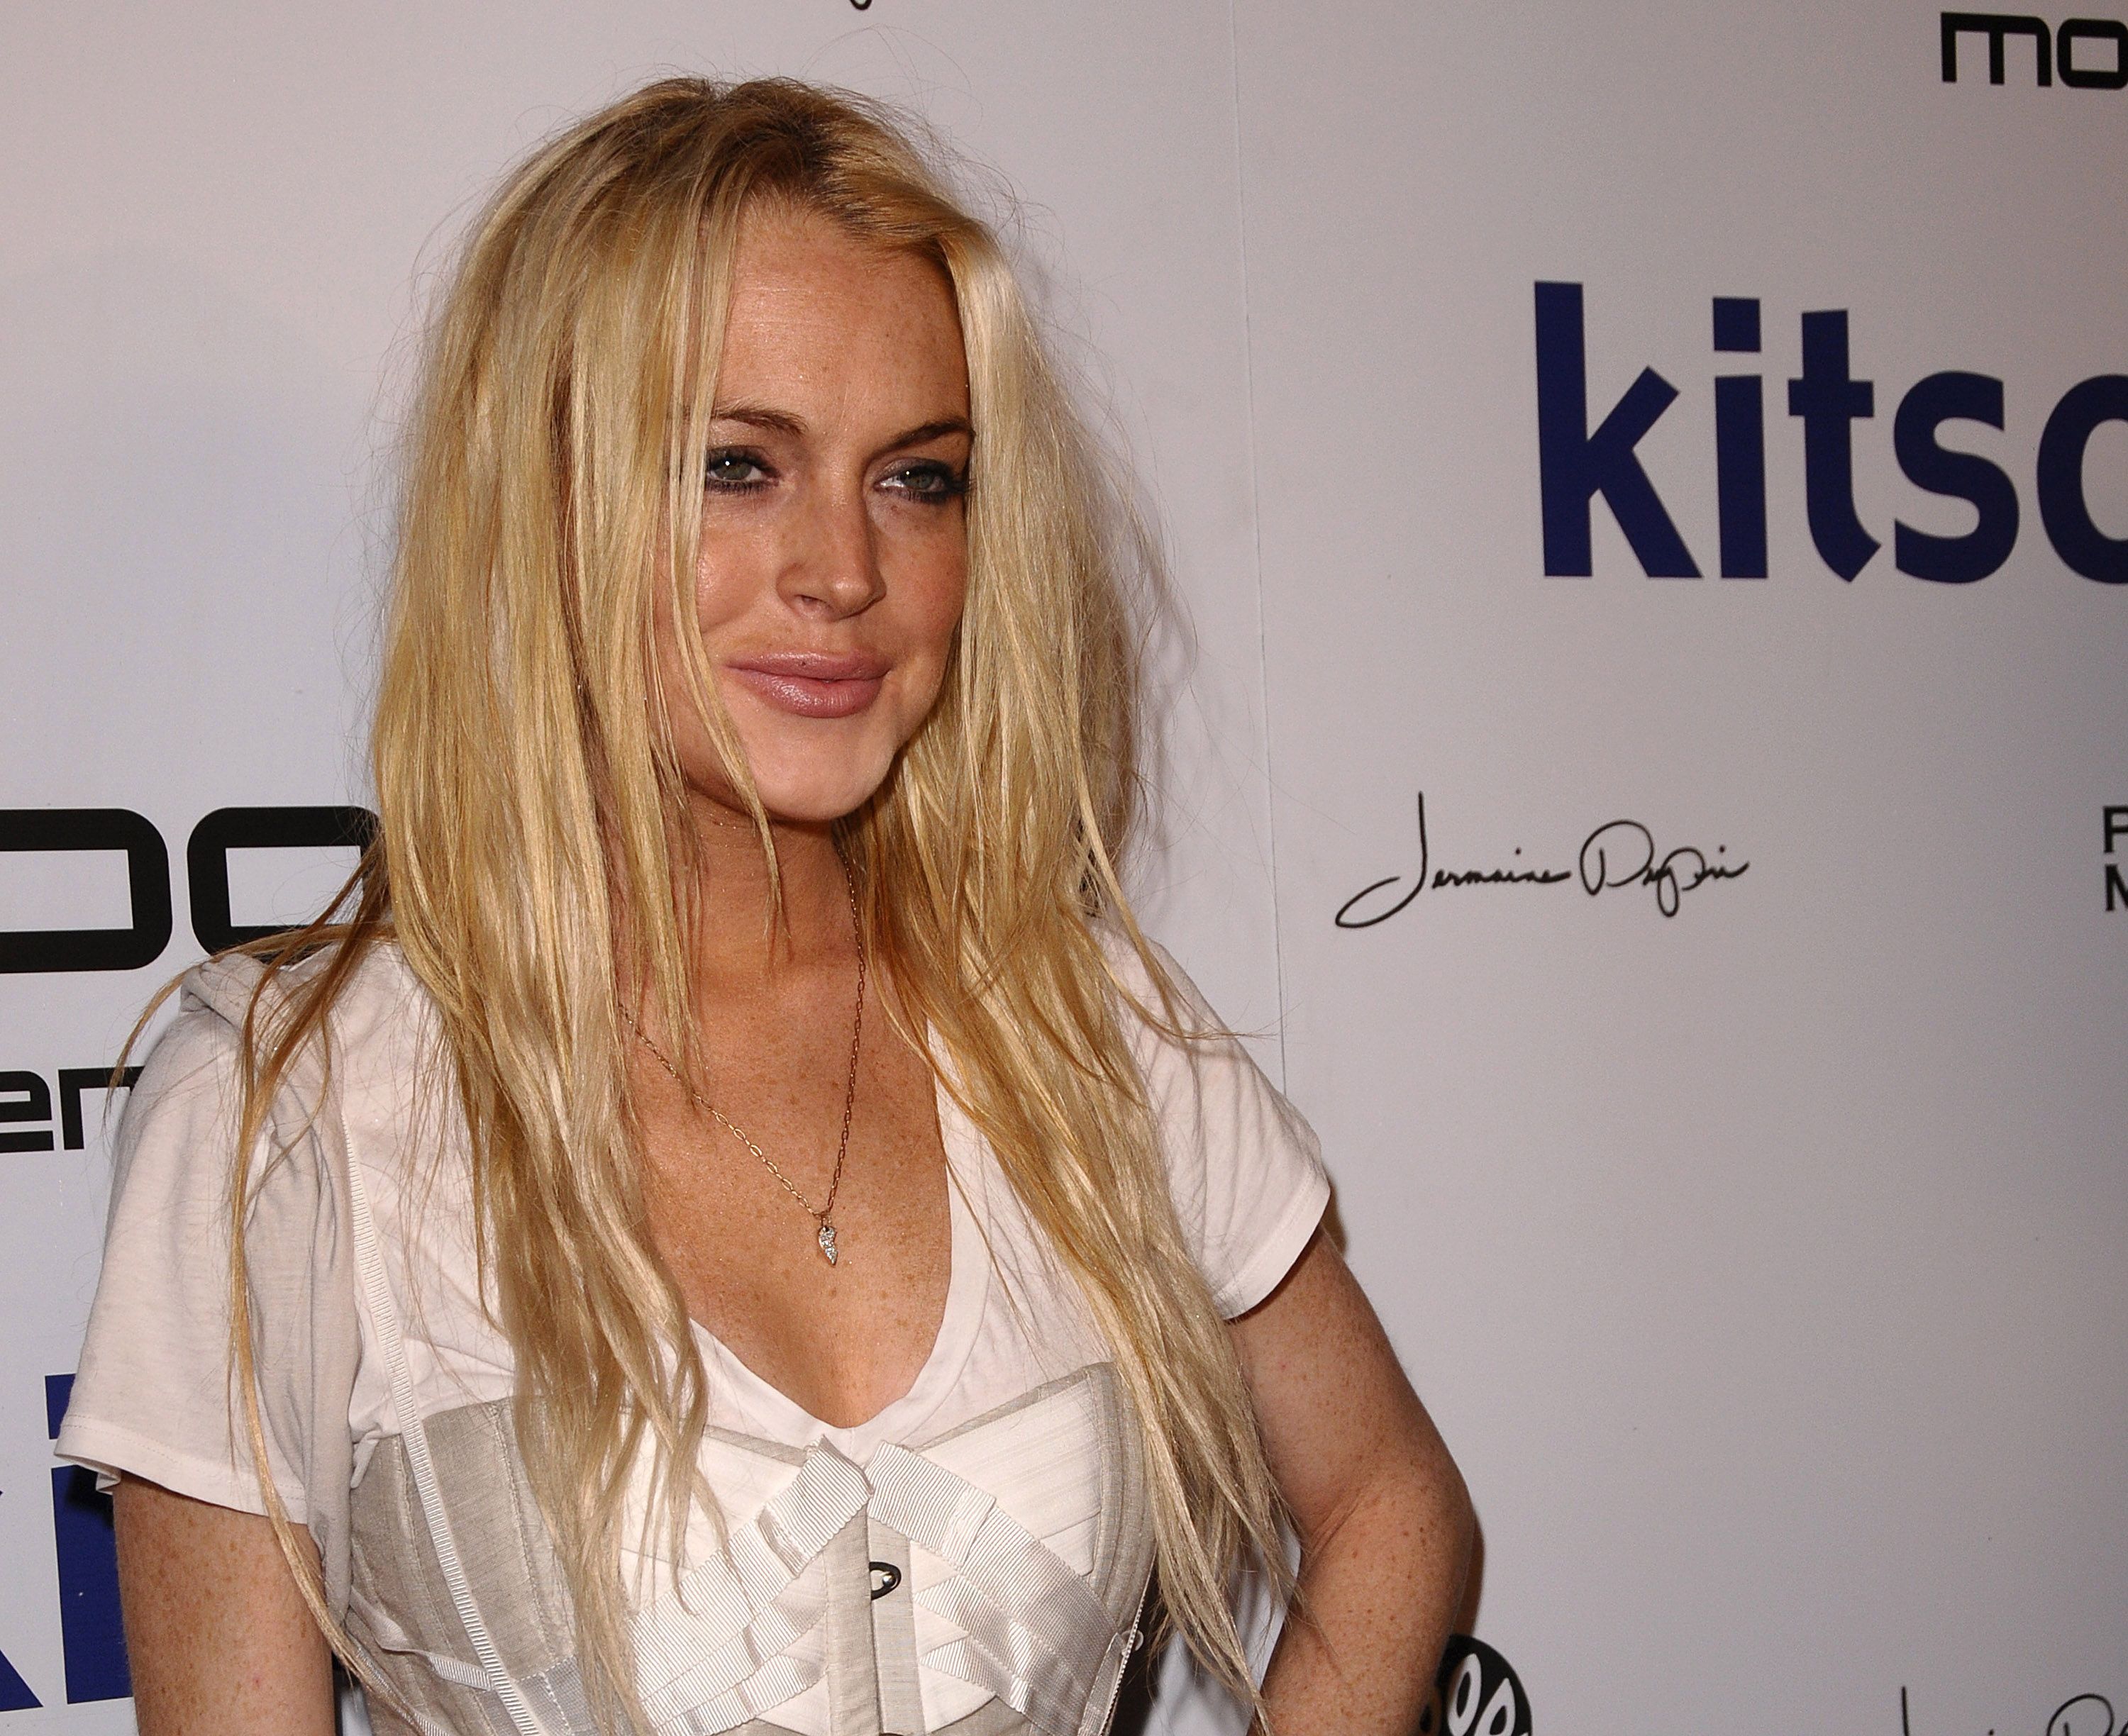 Lindsay Lohan attends the Nu Pop Movement Watch launch party at Kitson Men on November 12, 2009 in West Hollywood, California. | Source: Getty Images